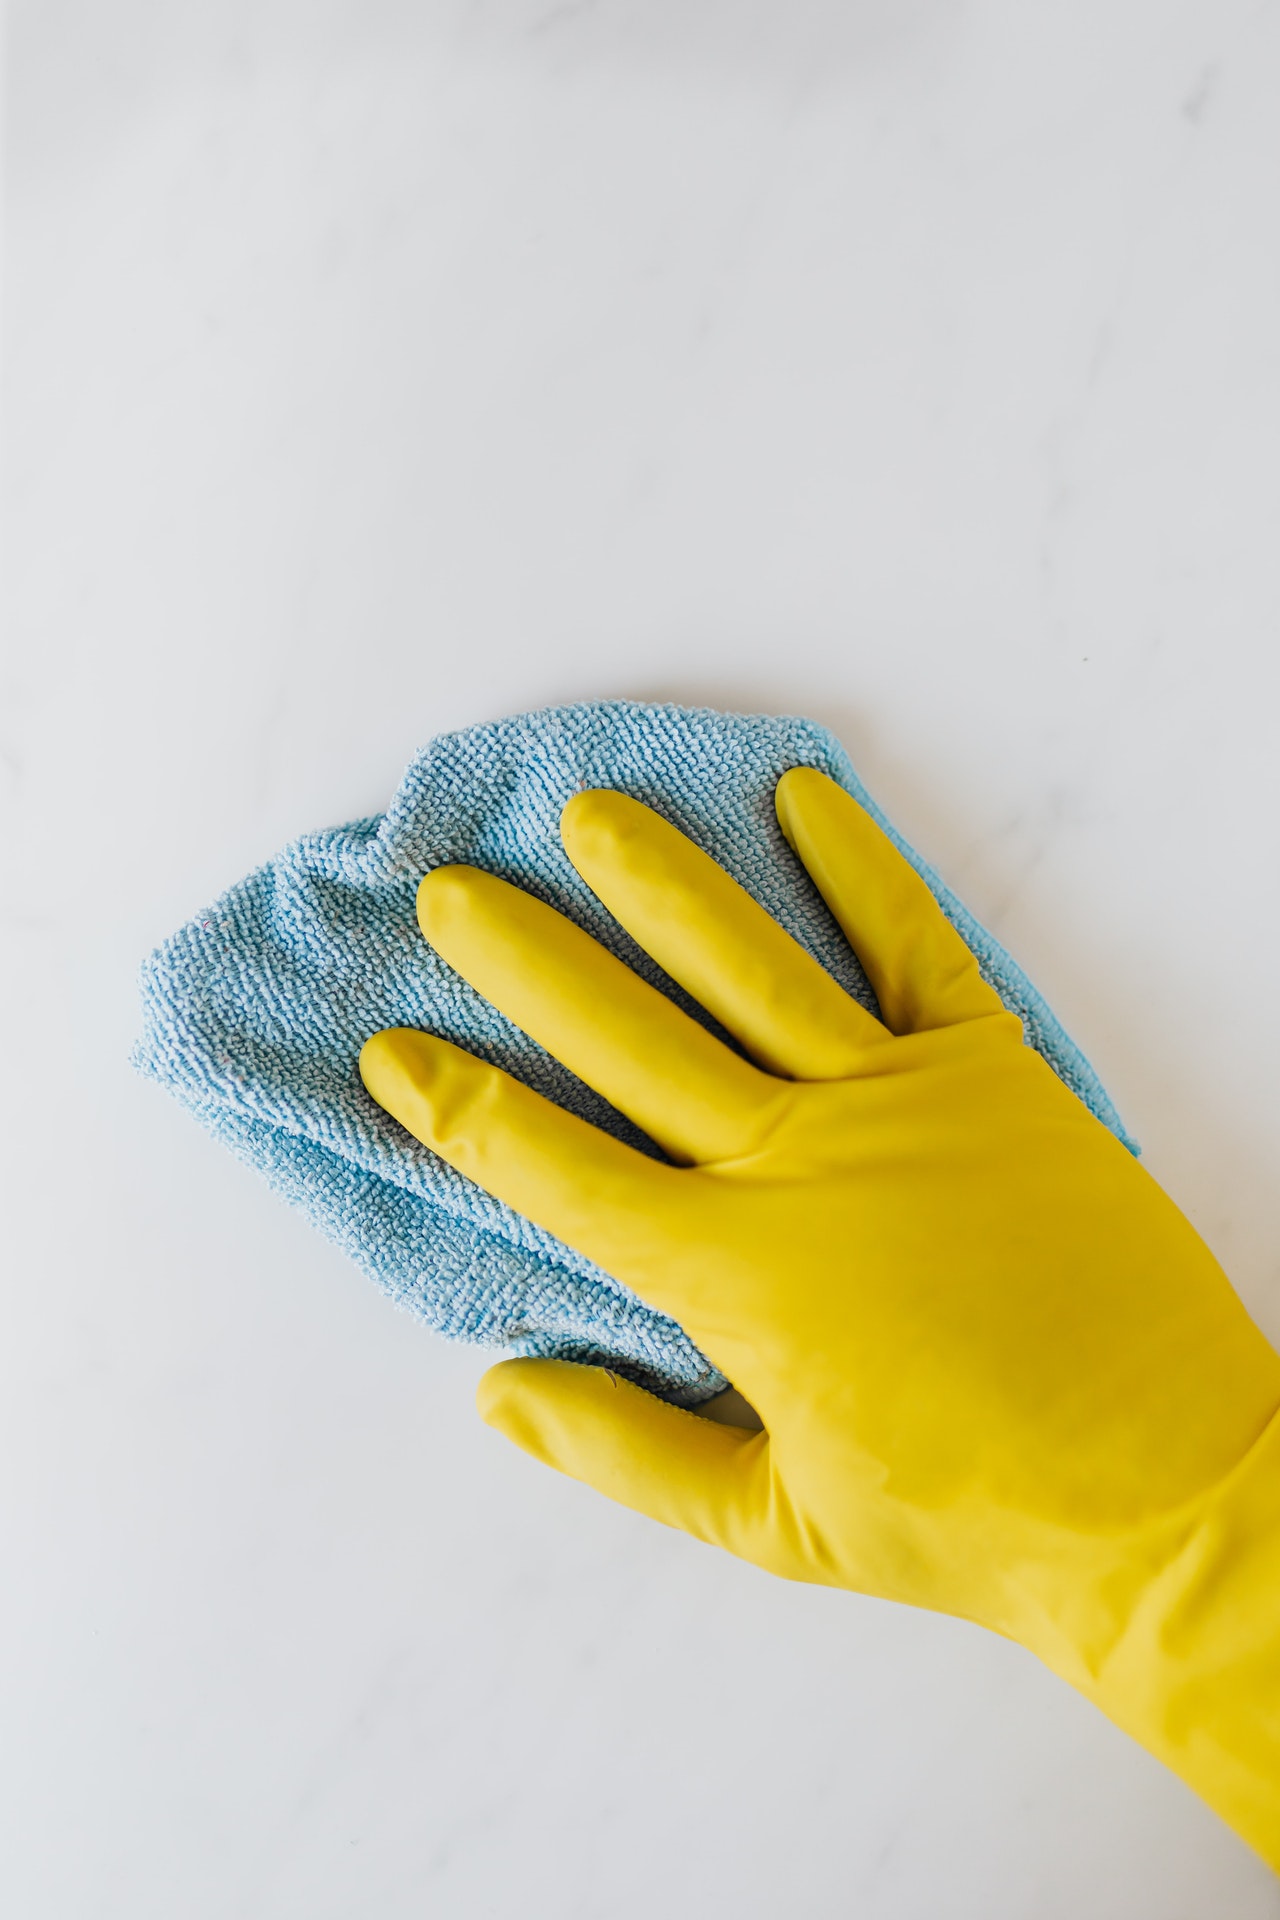 ercial cleaning services in Denmark. We have a wide range of commercial cleaning services that will work with your budget and needs. We offer same-day delivery, so you can be sure you’re getting the best possible service.